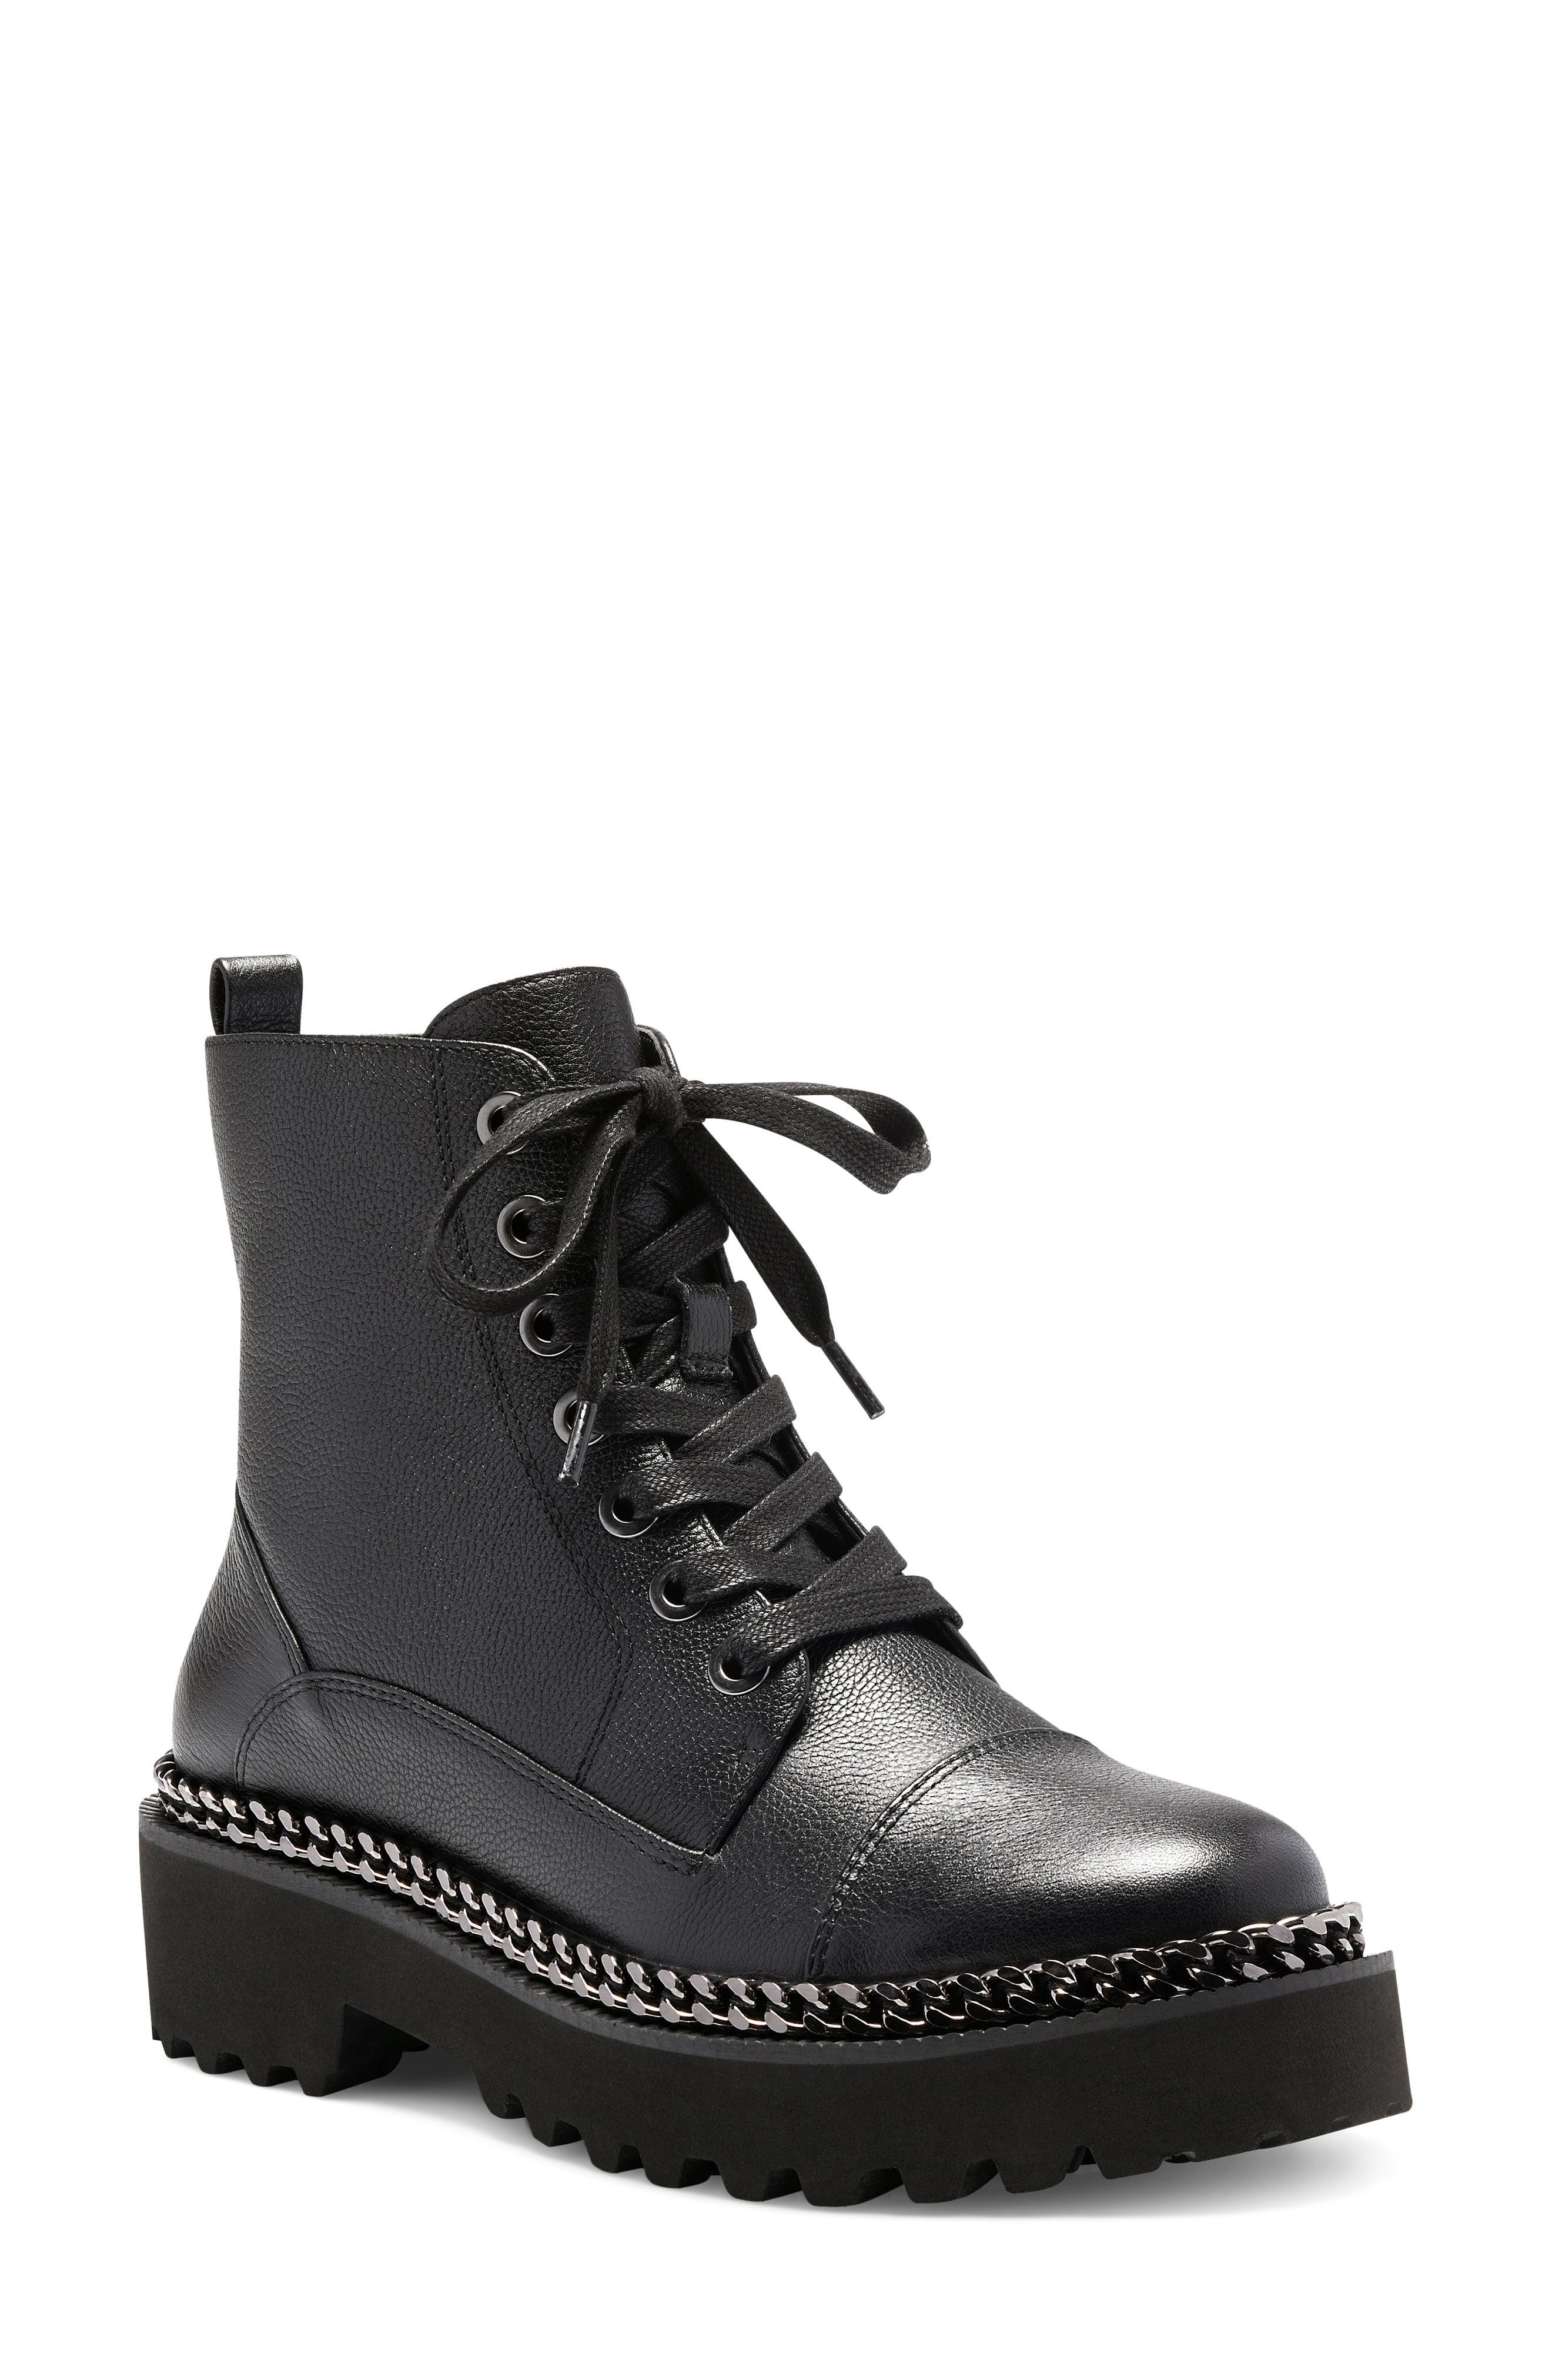 Vince Camuto Mindinta Chain Trim Combat Boot in Black | Lyst